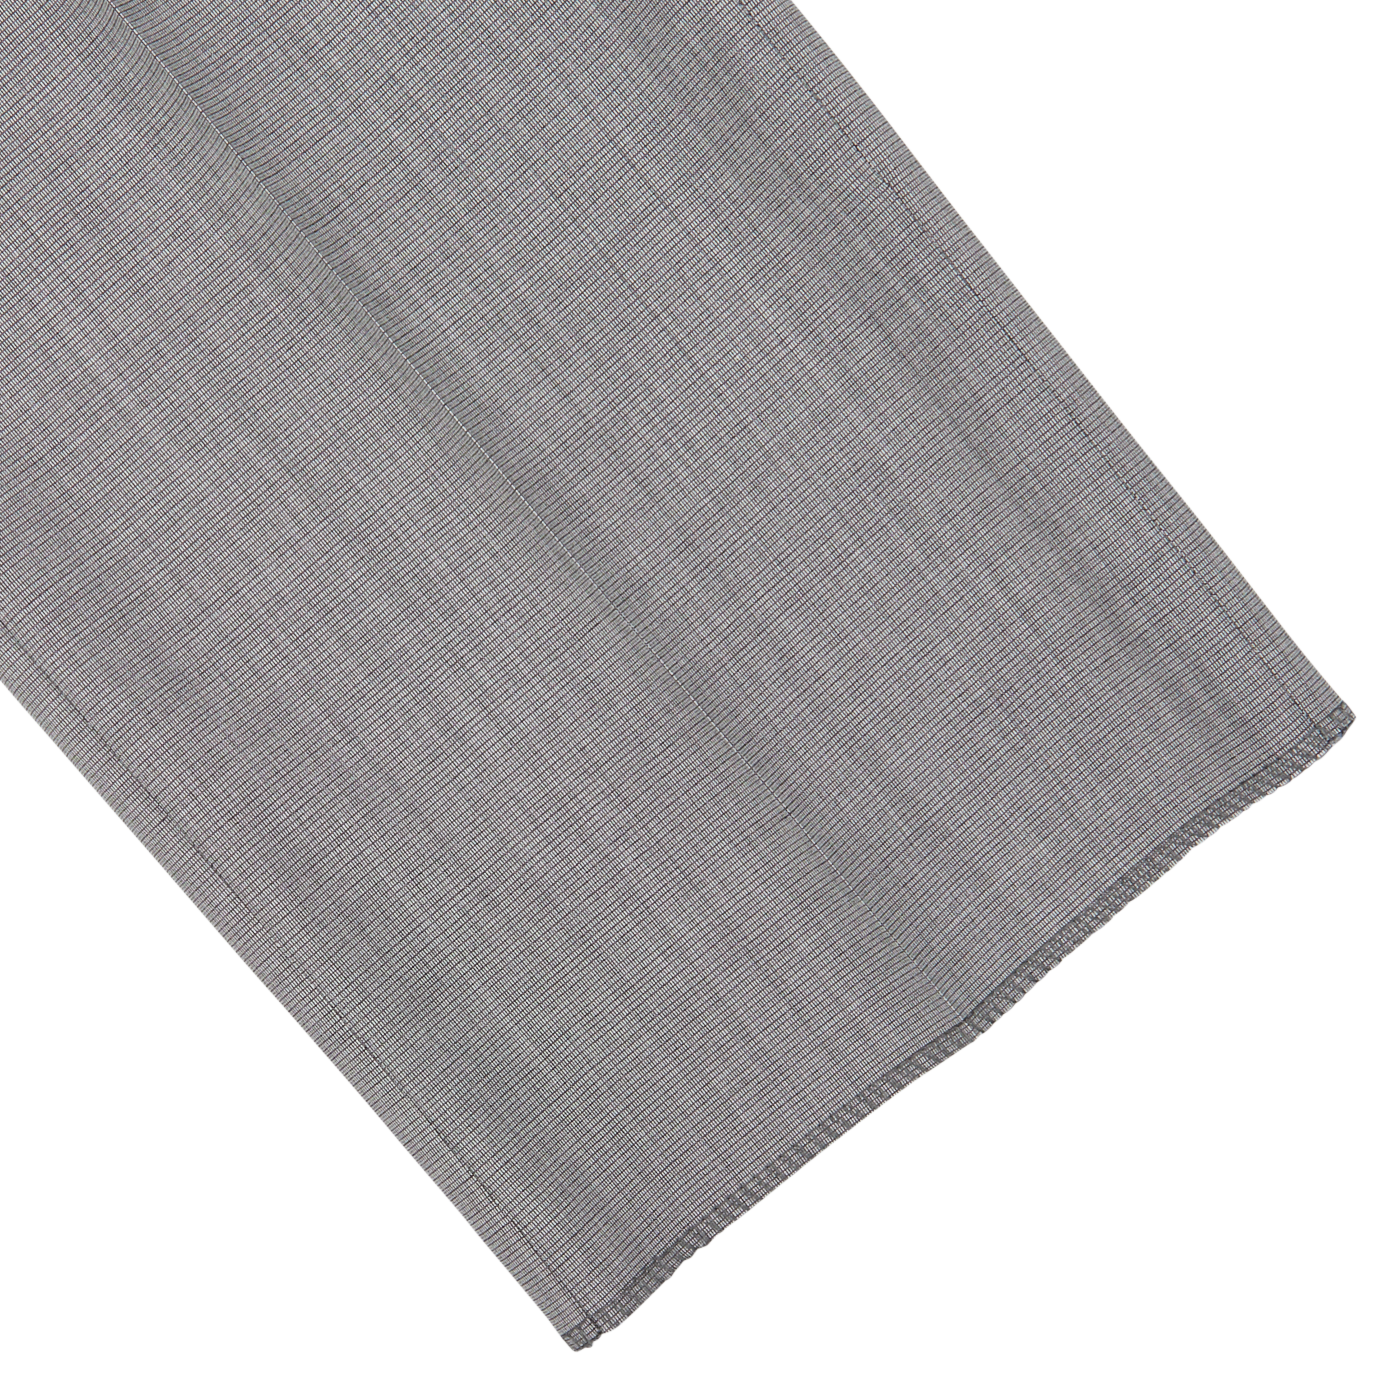 Gray fabric with a herringbone pattern laid flat on a white surface, embodying classic sartorial elegance- Canali Light Grey Micro Check Wool Suit.